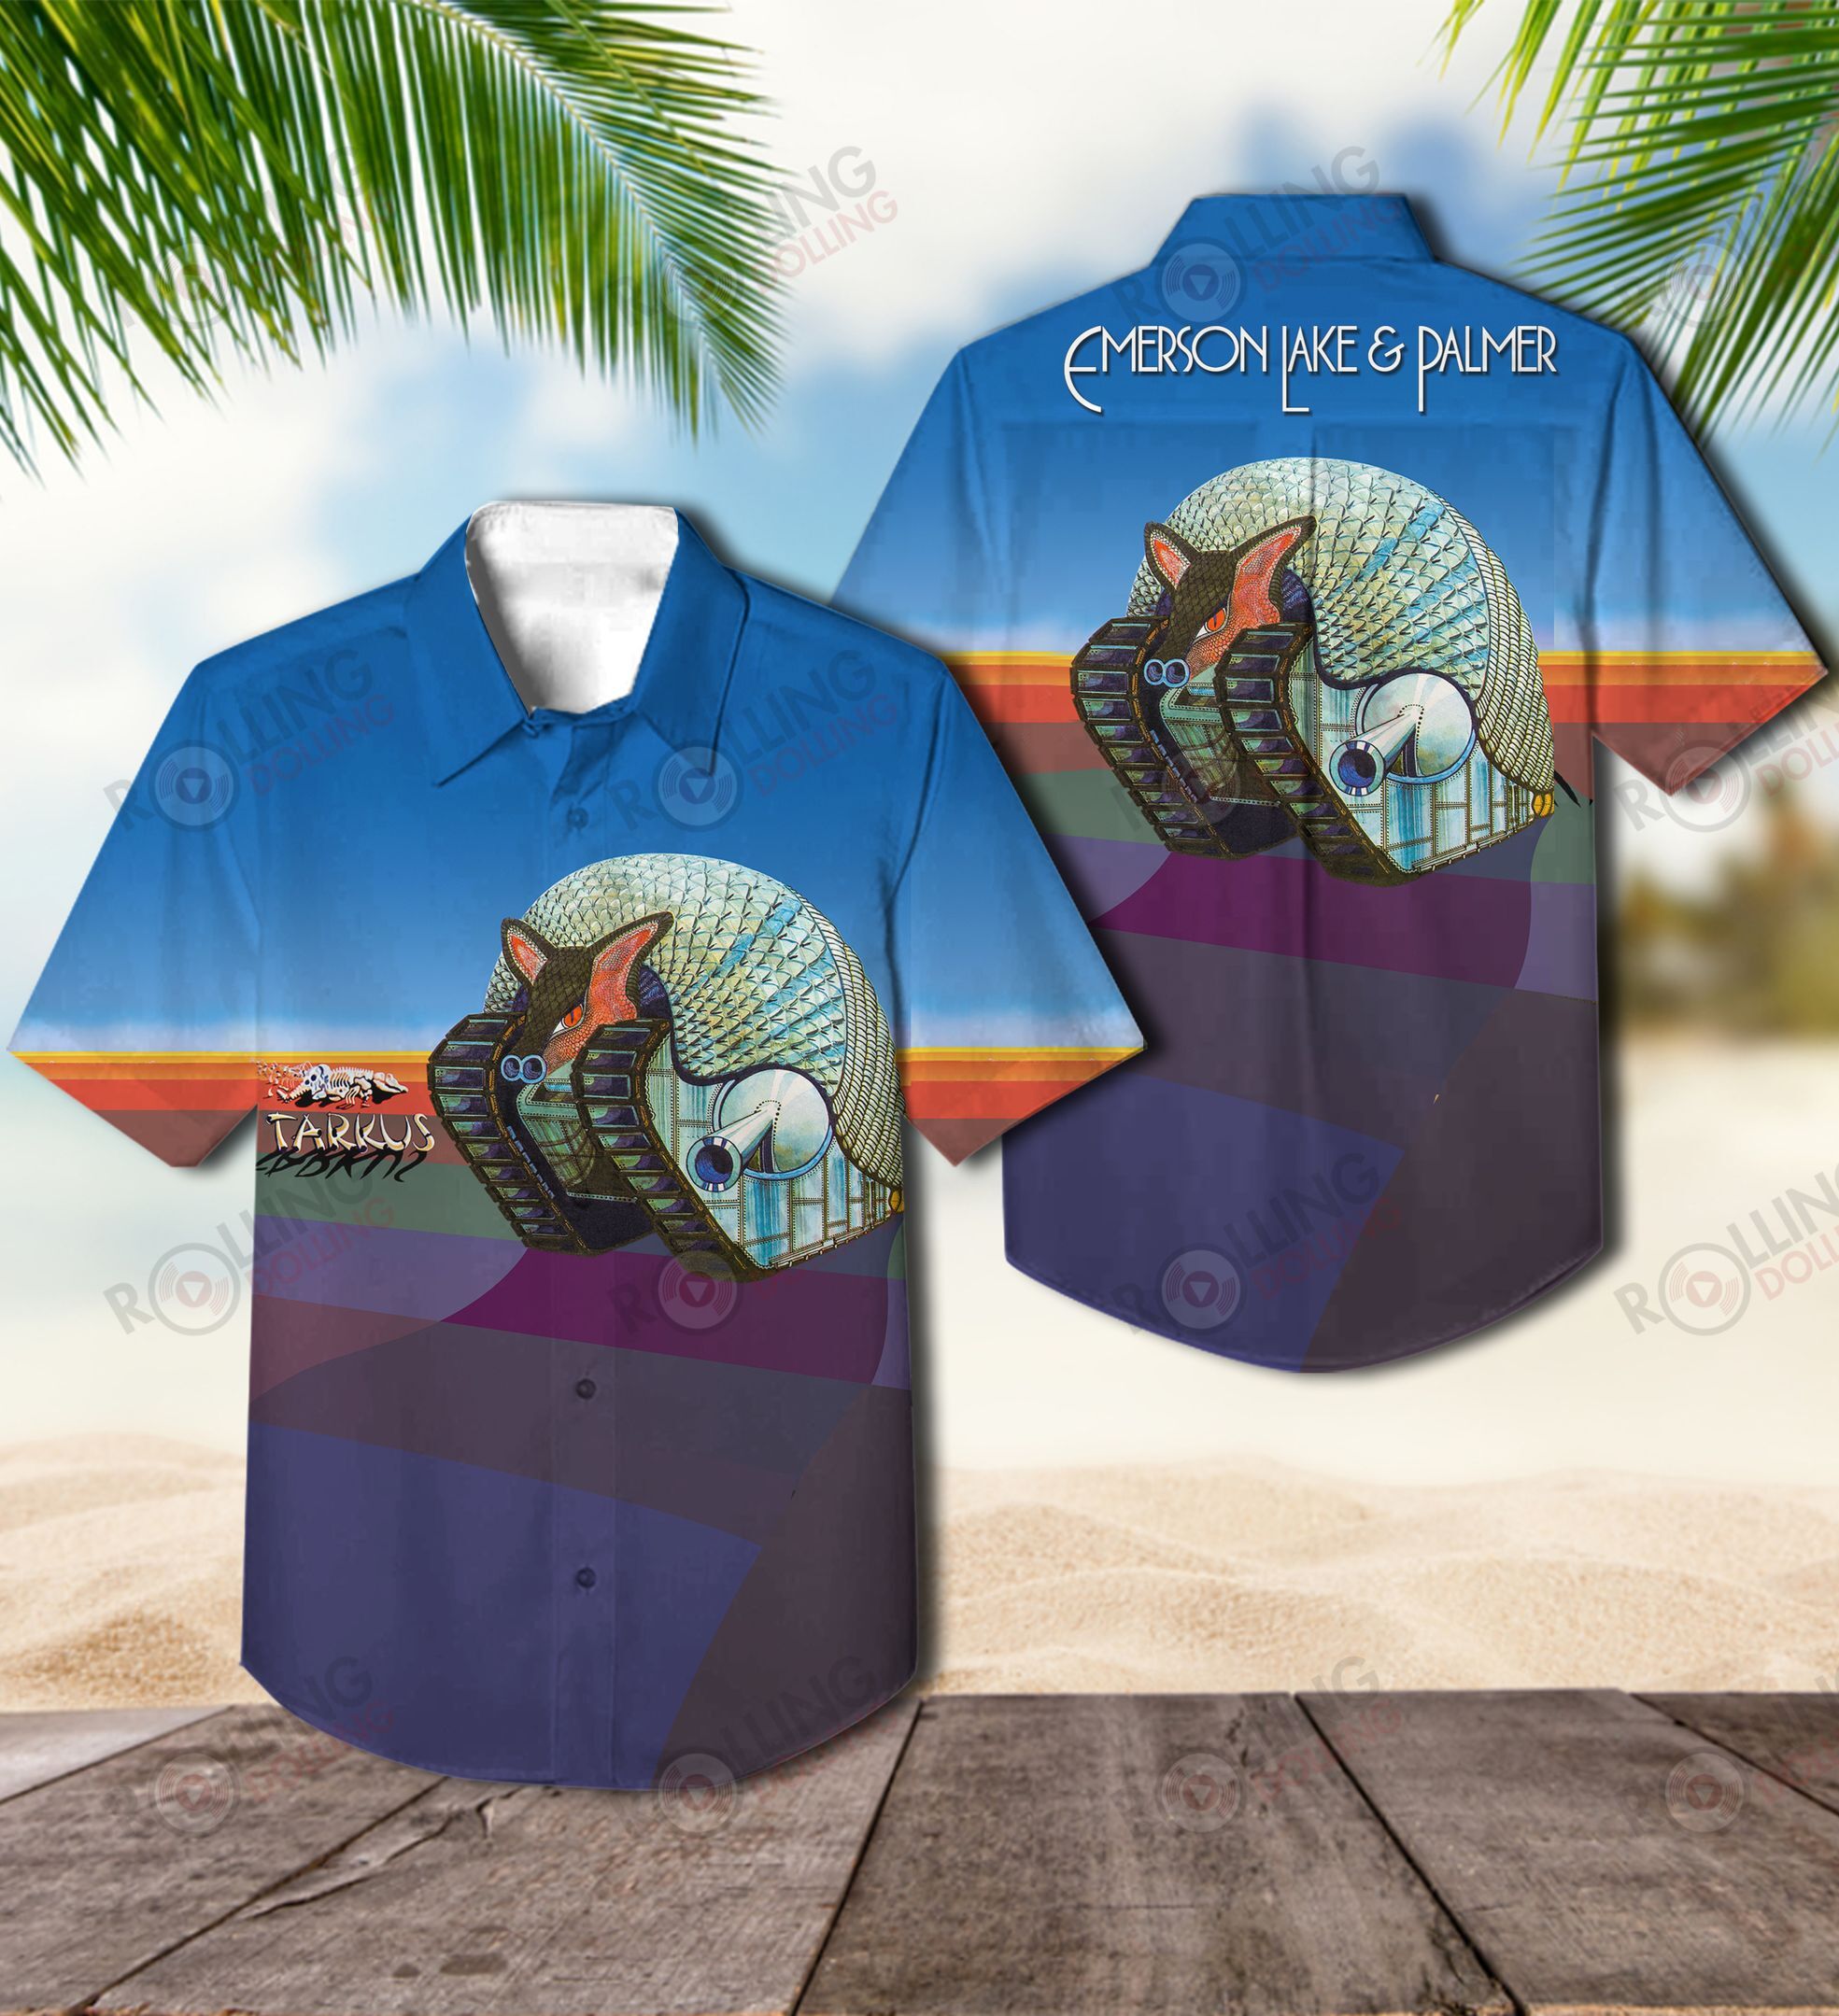 This would make a great gift for any fan who loves Hawaiian Shirt as well as Rock band 96